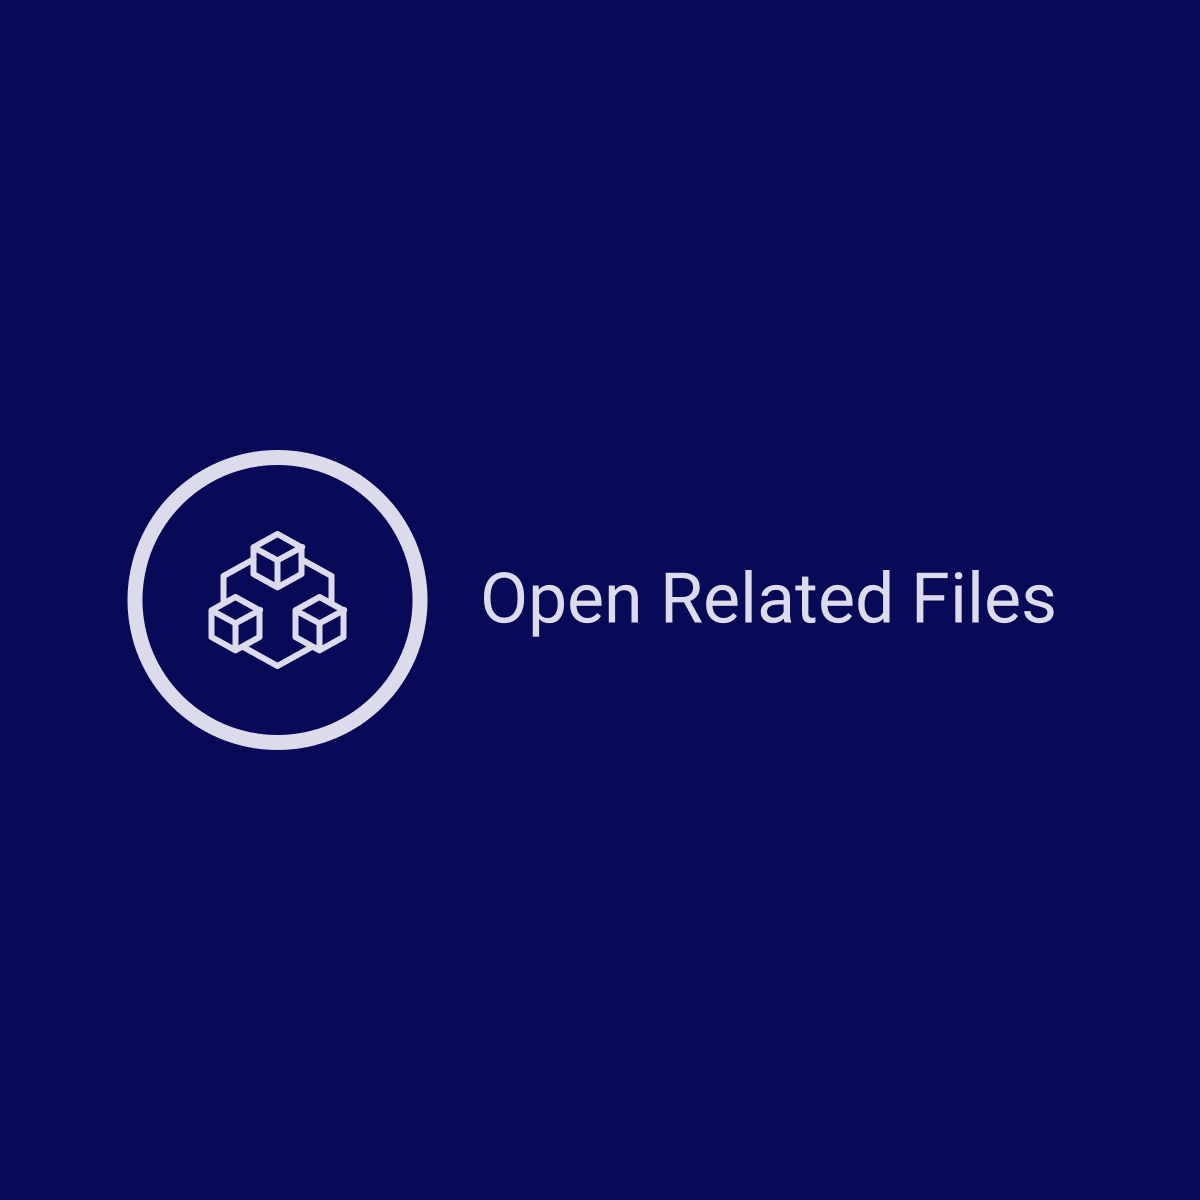 Open Related Files